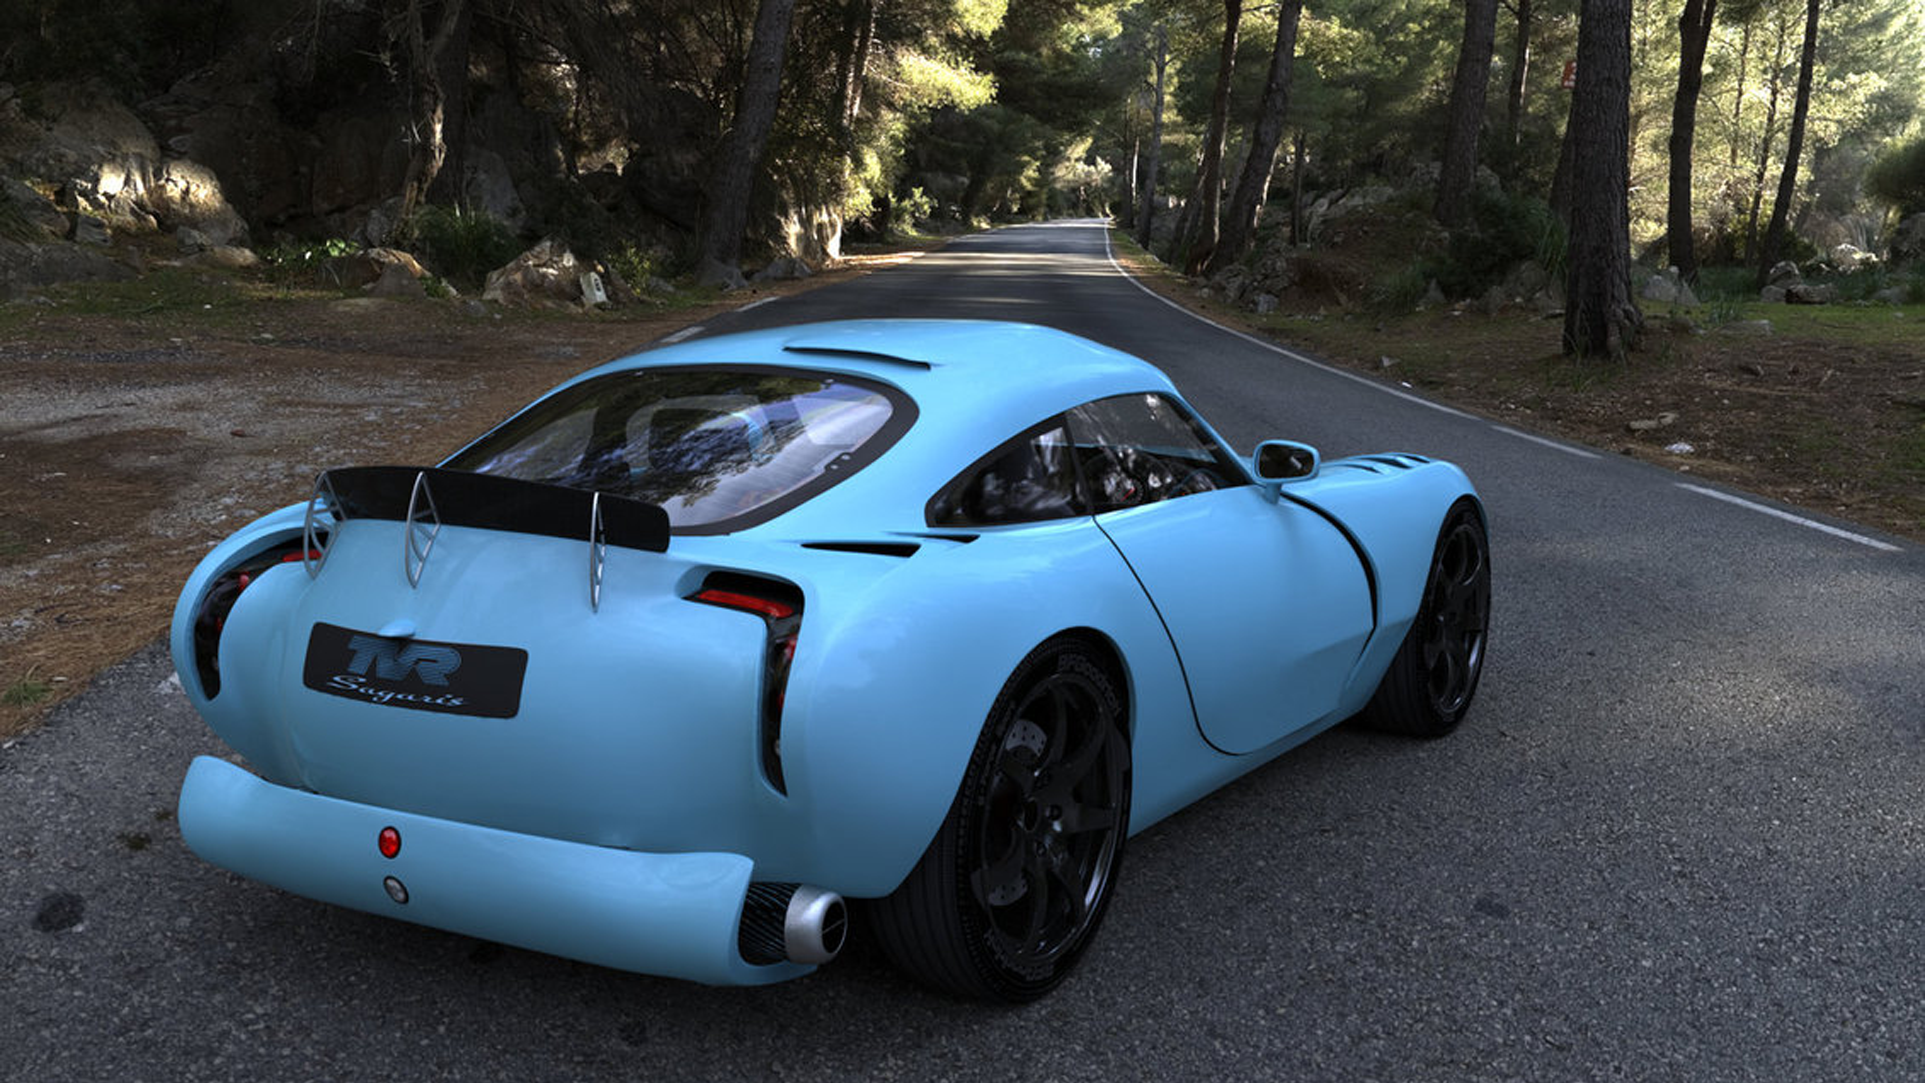 Tvr #8